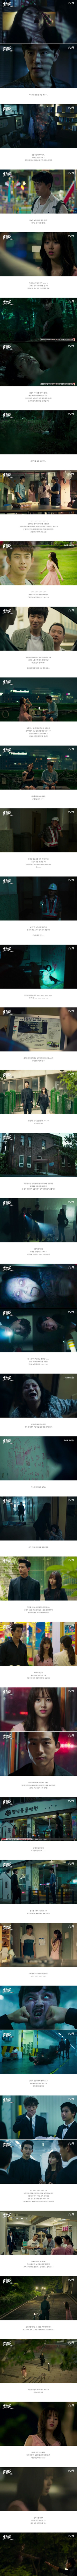 episode 8 captures for the Korean drama 'Bring It On, Ghost'